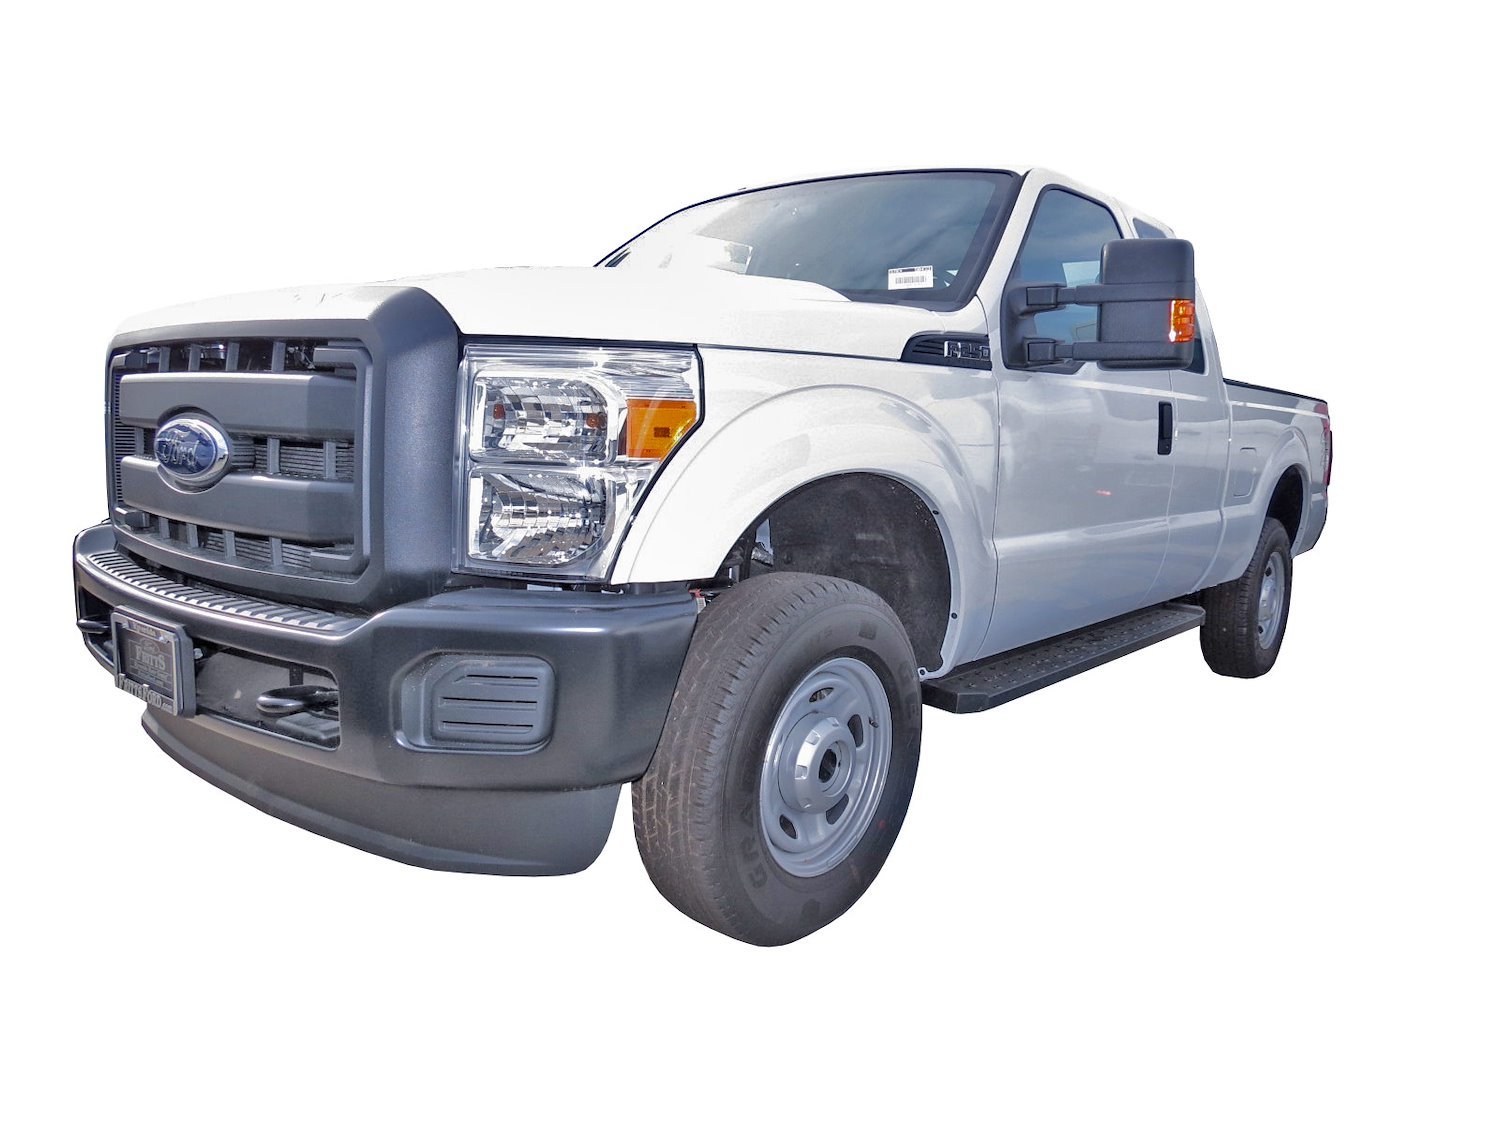 STX 600 utility boards were designed with a maximum durable style finish for the working truck and v